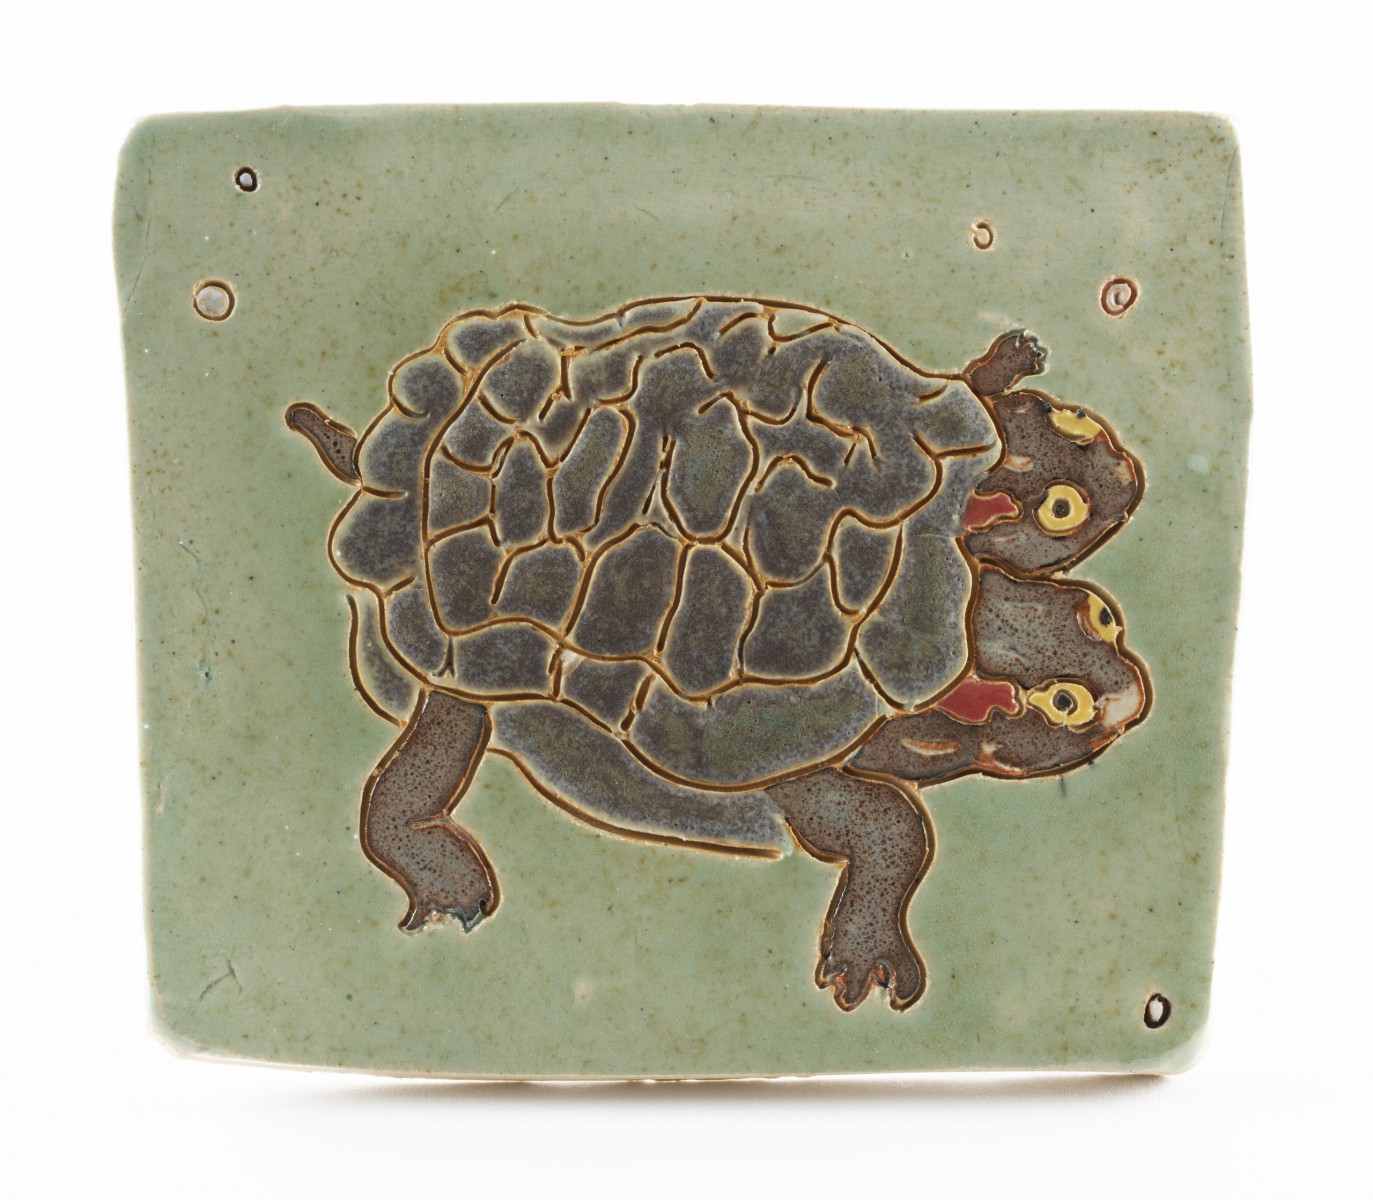 Kevin McNamee-Tweed. <em>Young Two-headed Sea Turtle</em>, 2023. Glazed ceramic, 4 1/2 x 5 1/4 inches  (11.4 x 13.3 cm)